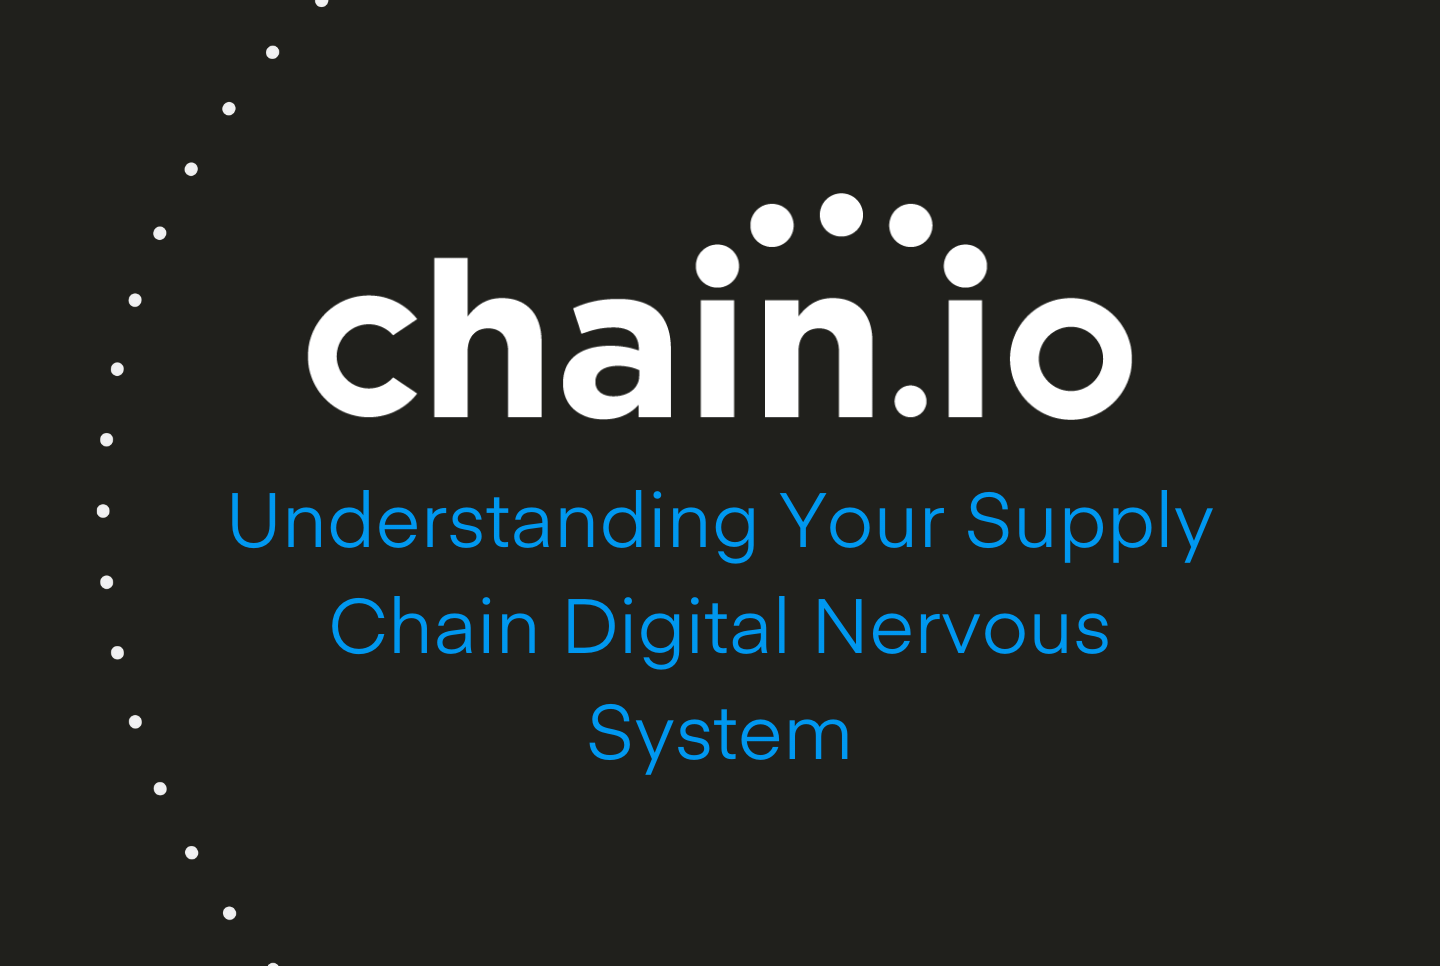 Understanding your supply chain digital nervous system with Alison Cusack, Founder & Principal Lawyer at Cusak & Co and Brian Glick, CEO and Founder of Chain.io